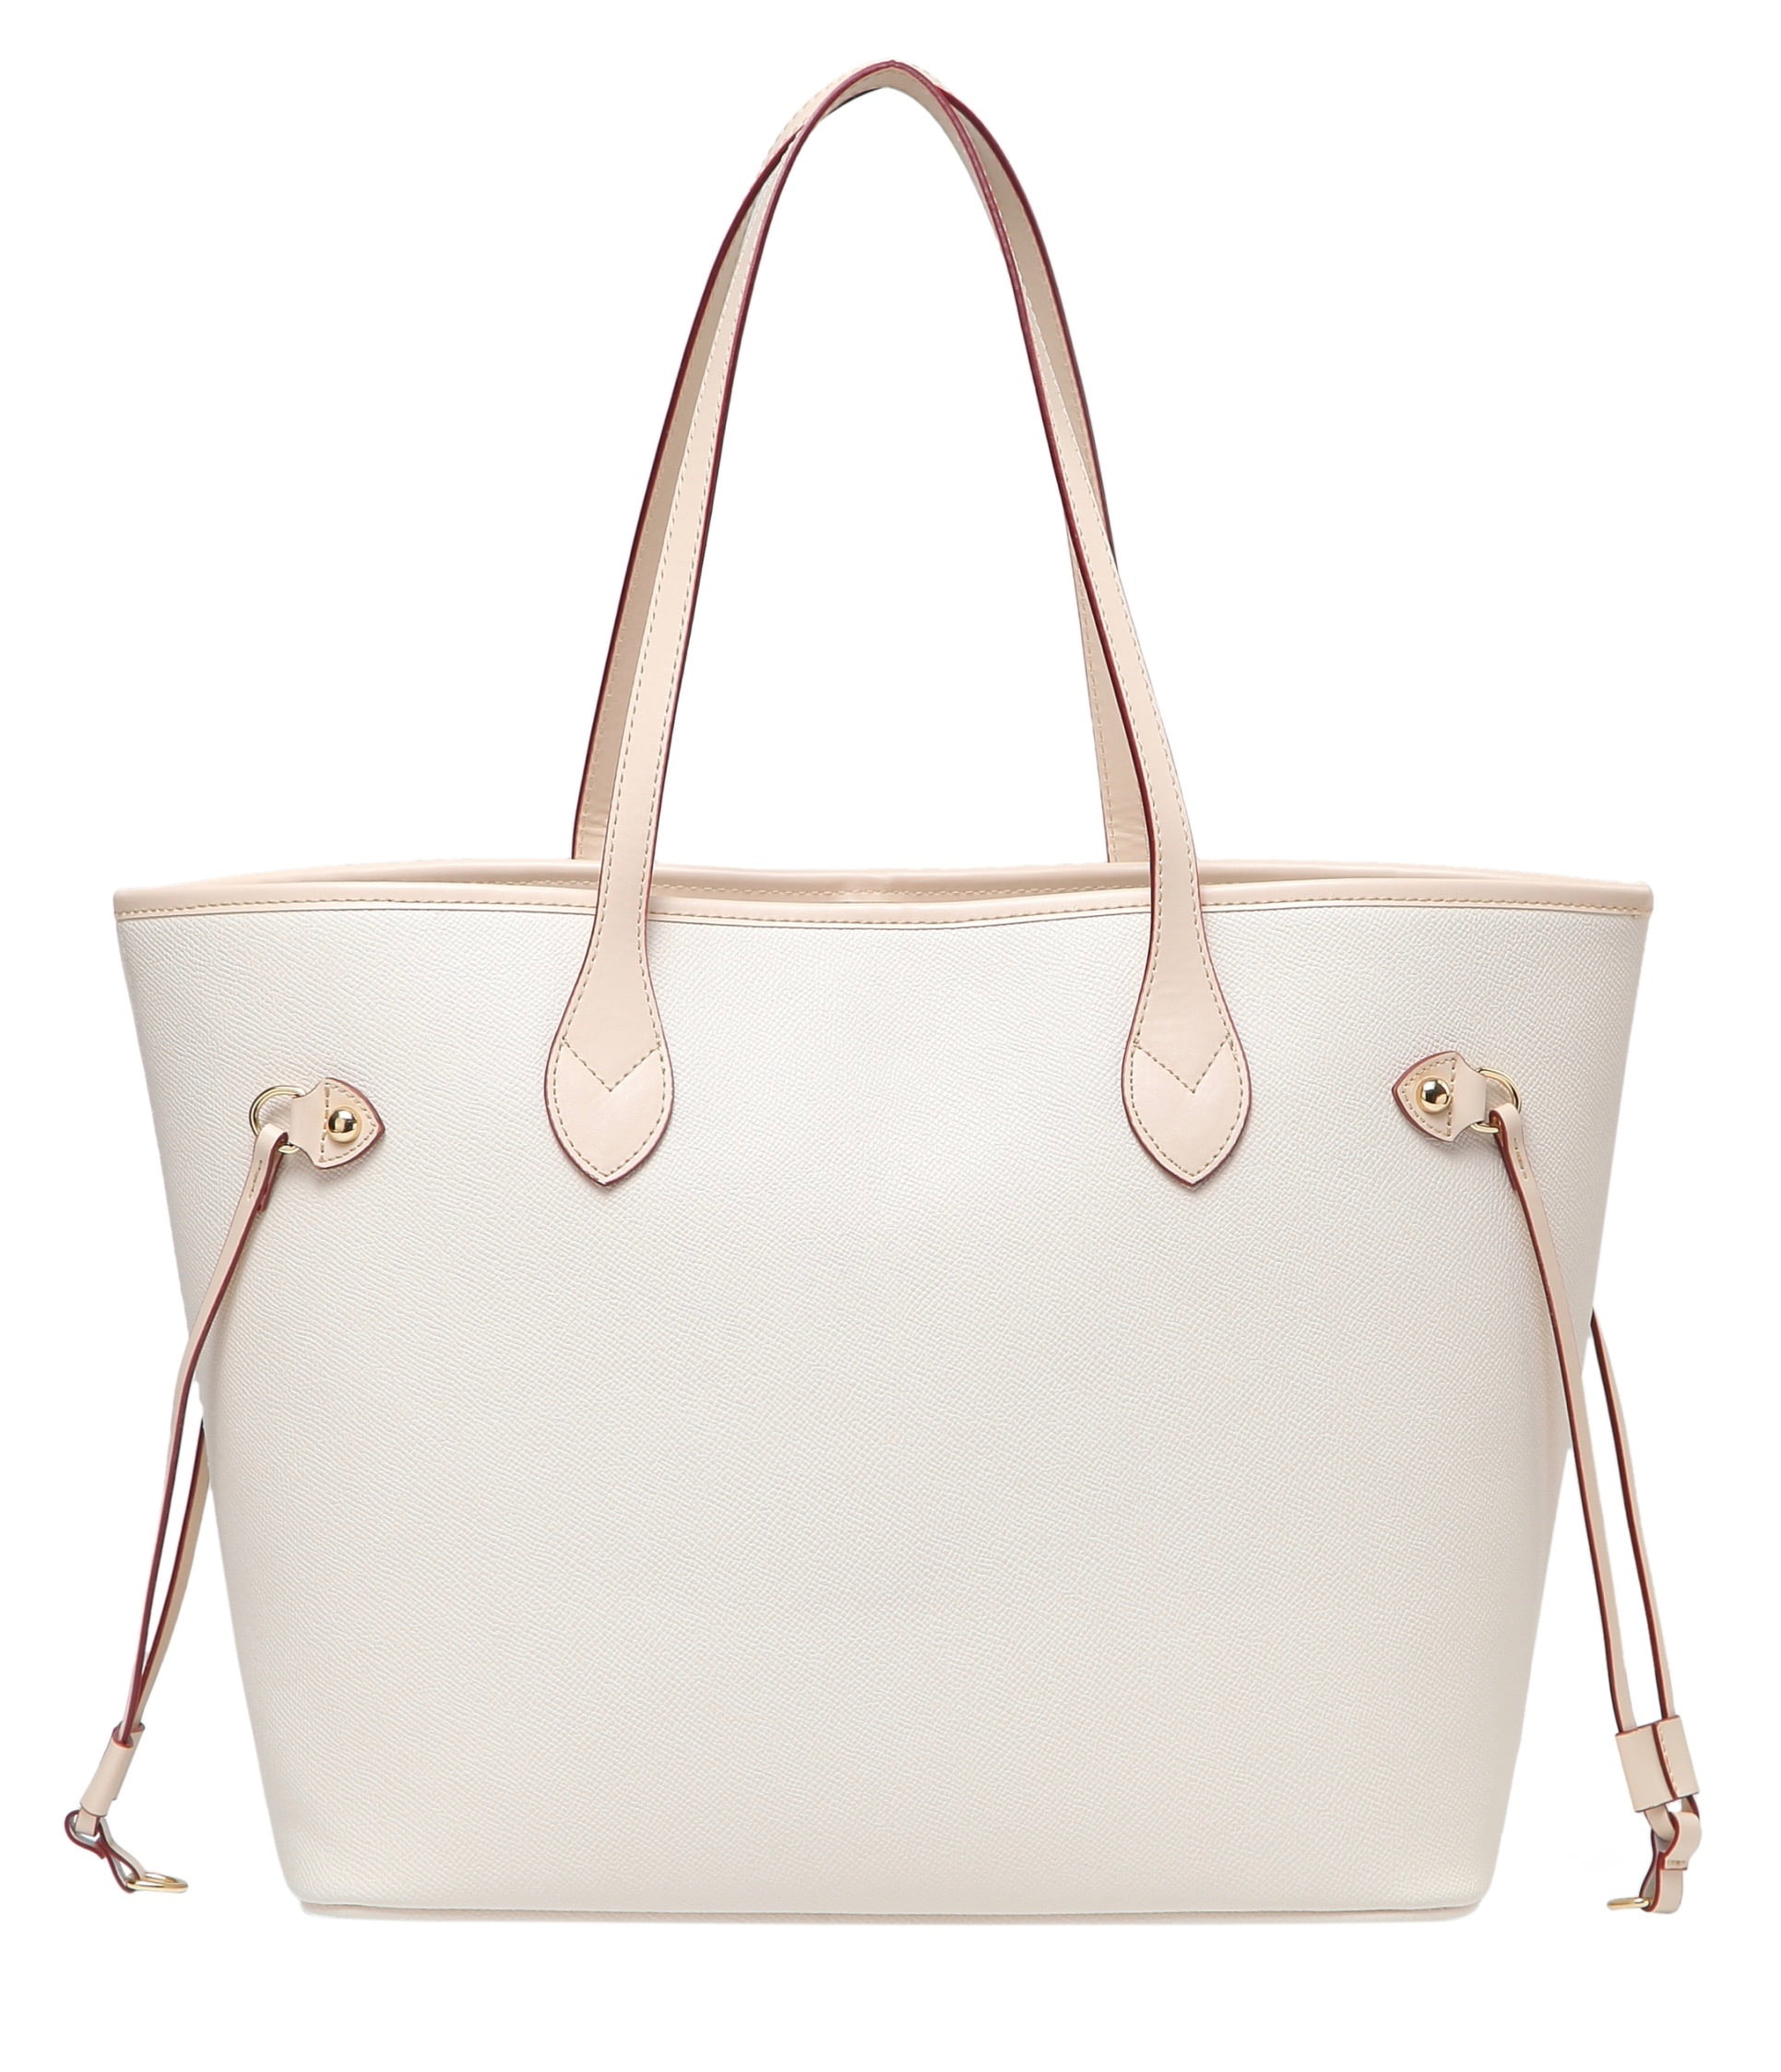 Tote Shoulder Bag with inner pouch – Daisy Rose bags